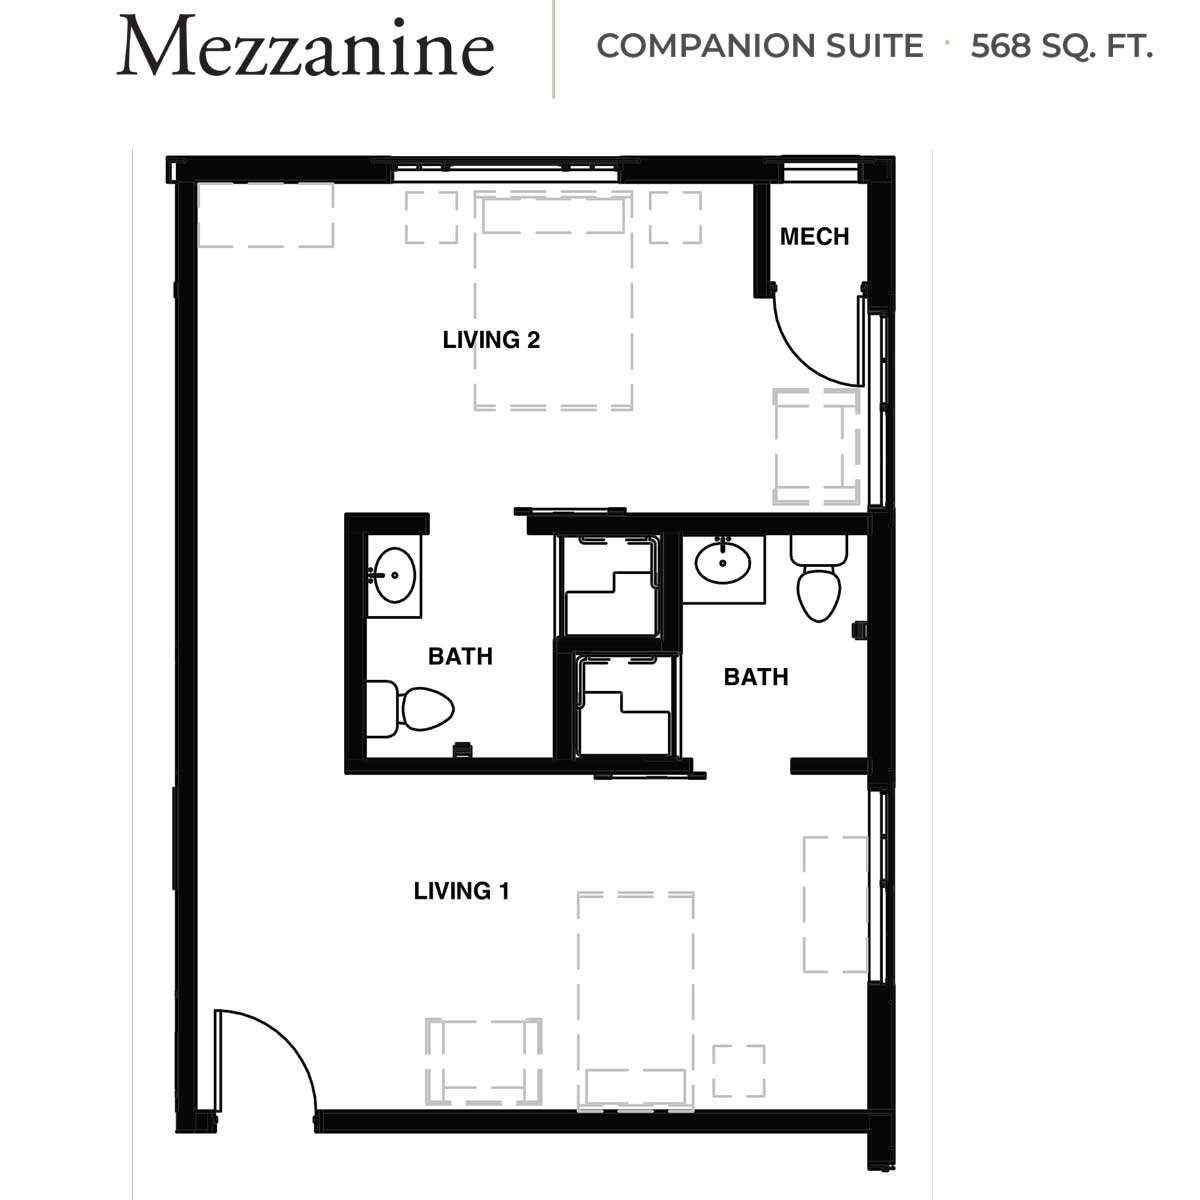 Floor plan of the Mezzanine Companion Suite with 568 square feet, featuring two living areas and two bathrooms.